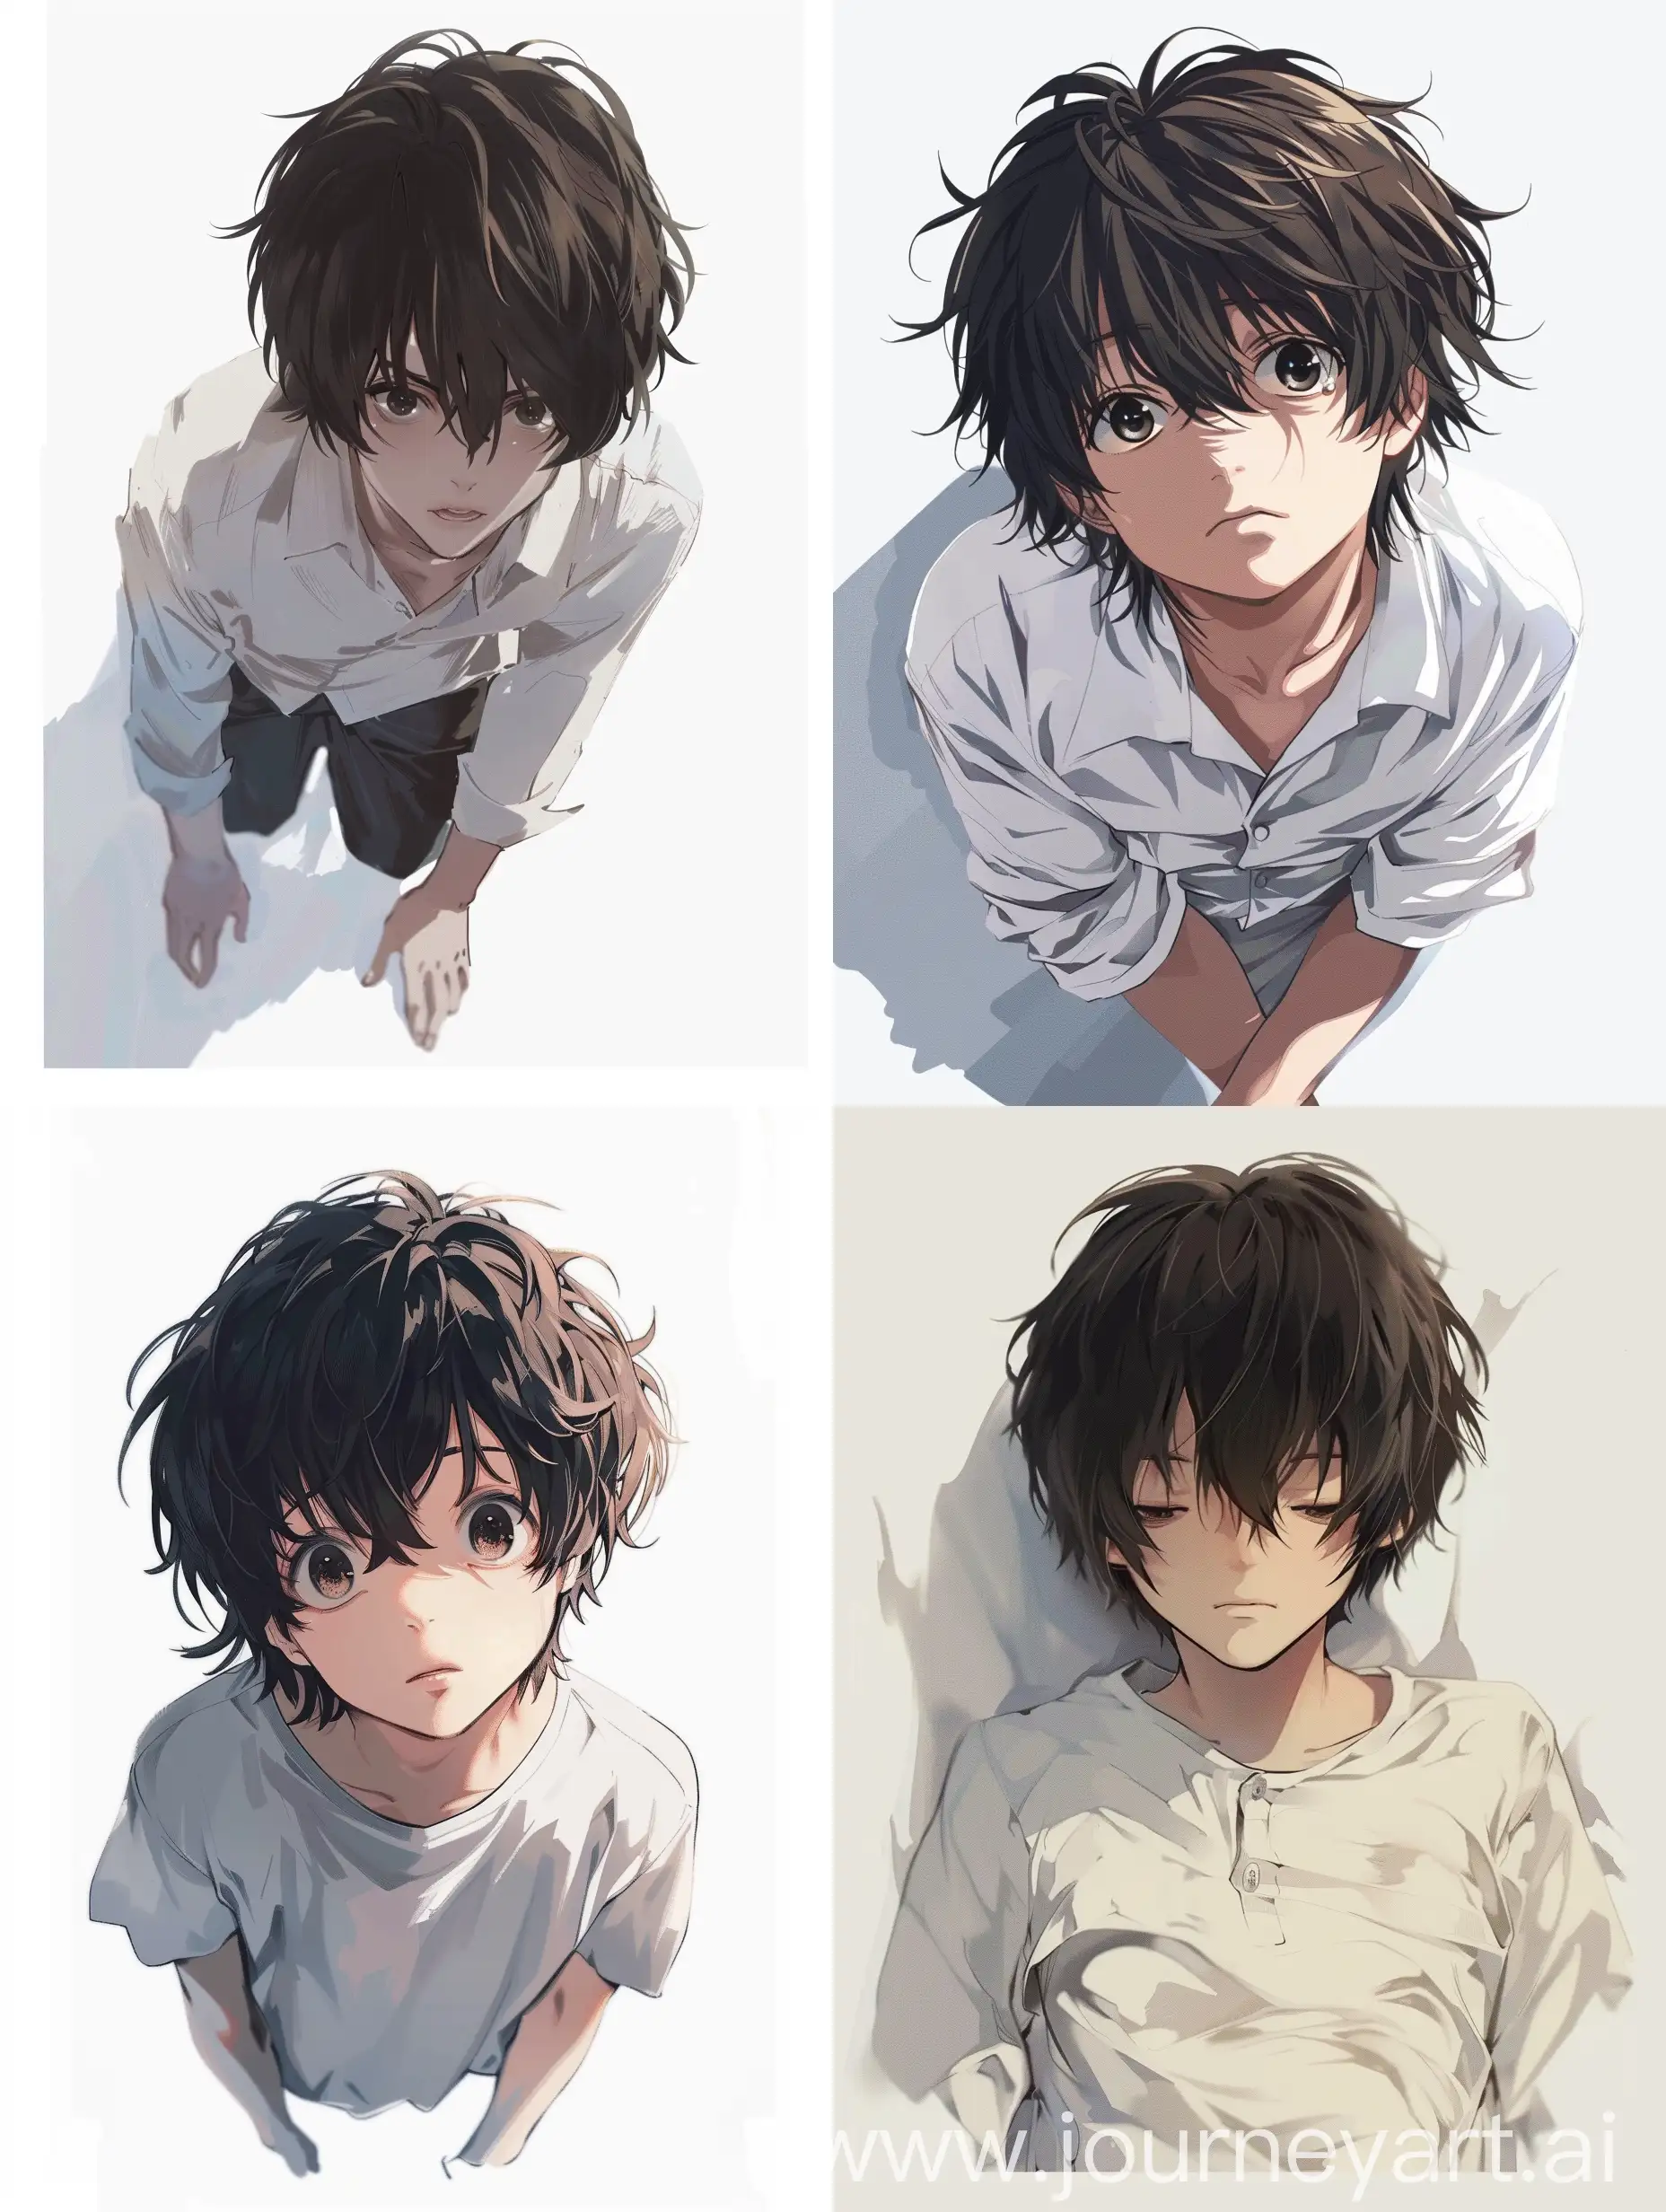 Anime-Boy-in-White-Shirt-with-Dark-Hair-from-Top-View-Angle